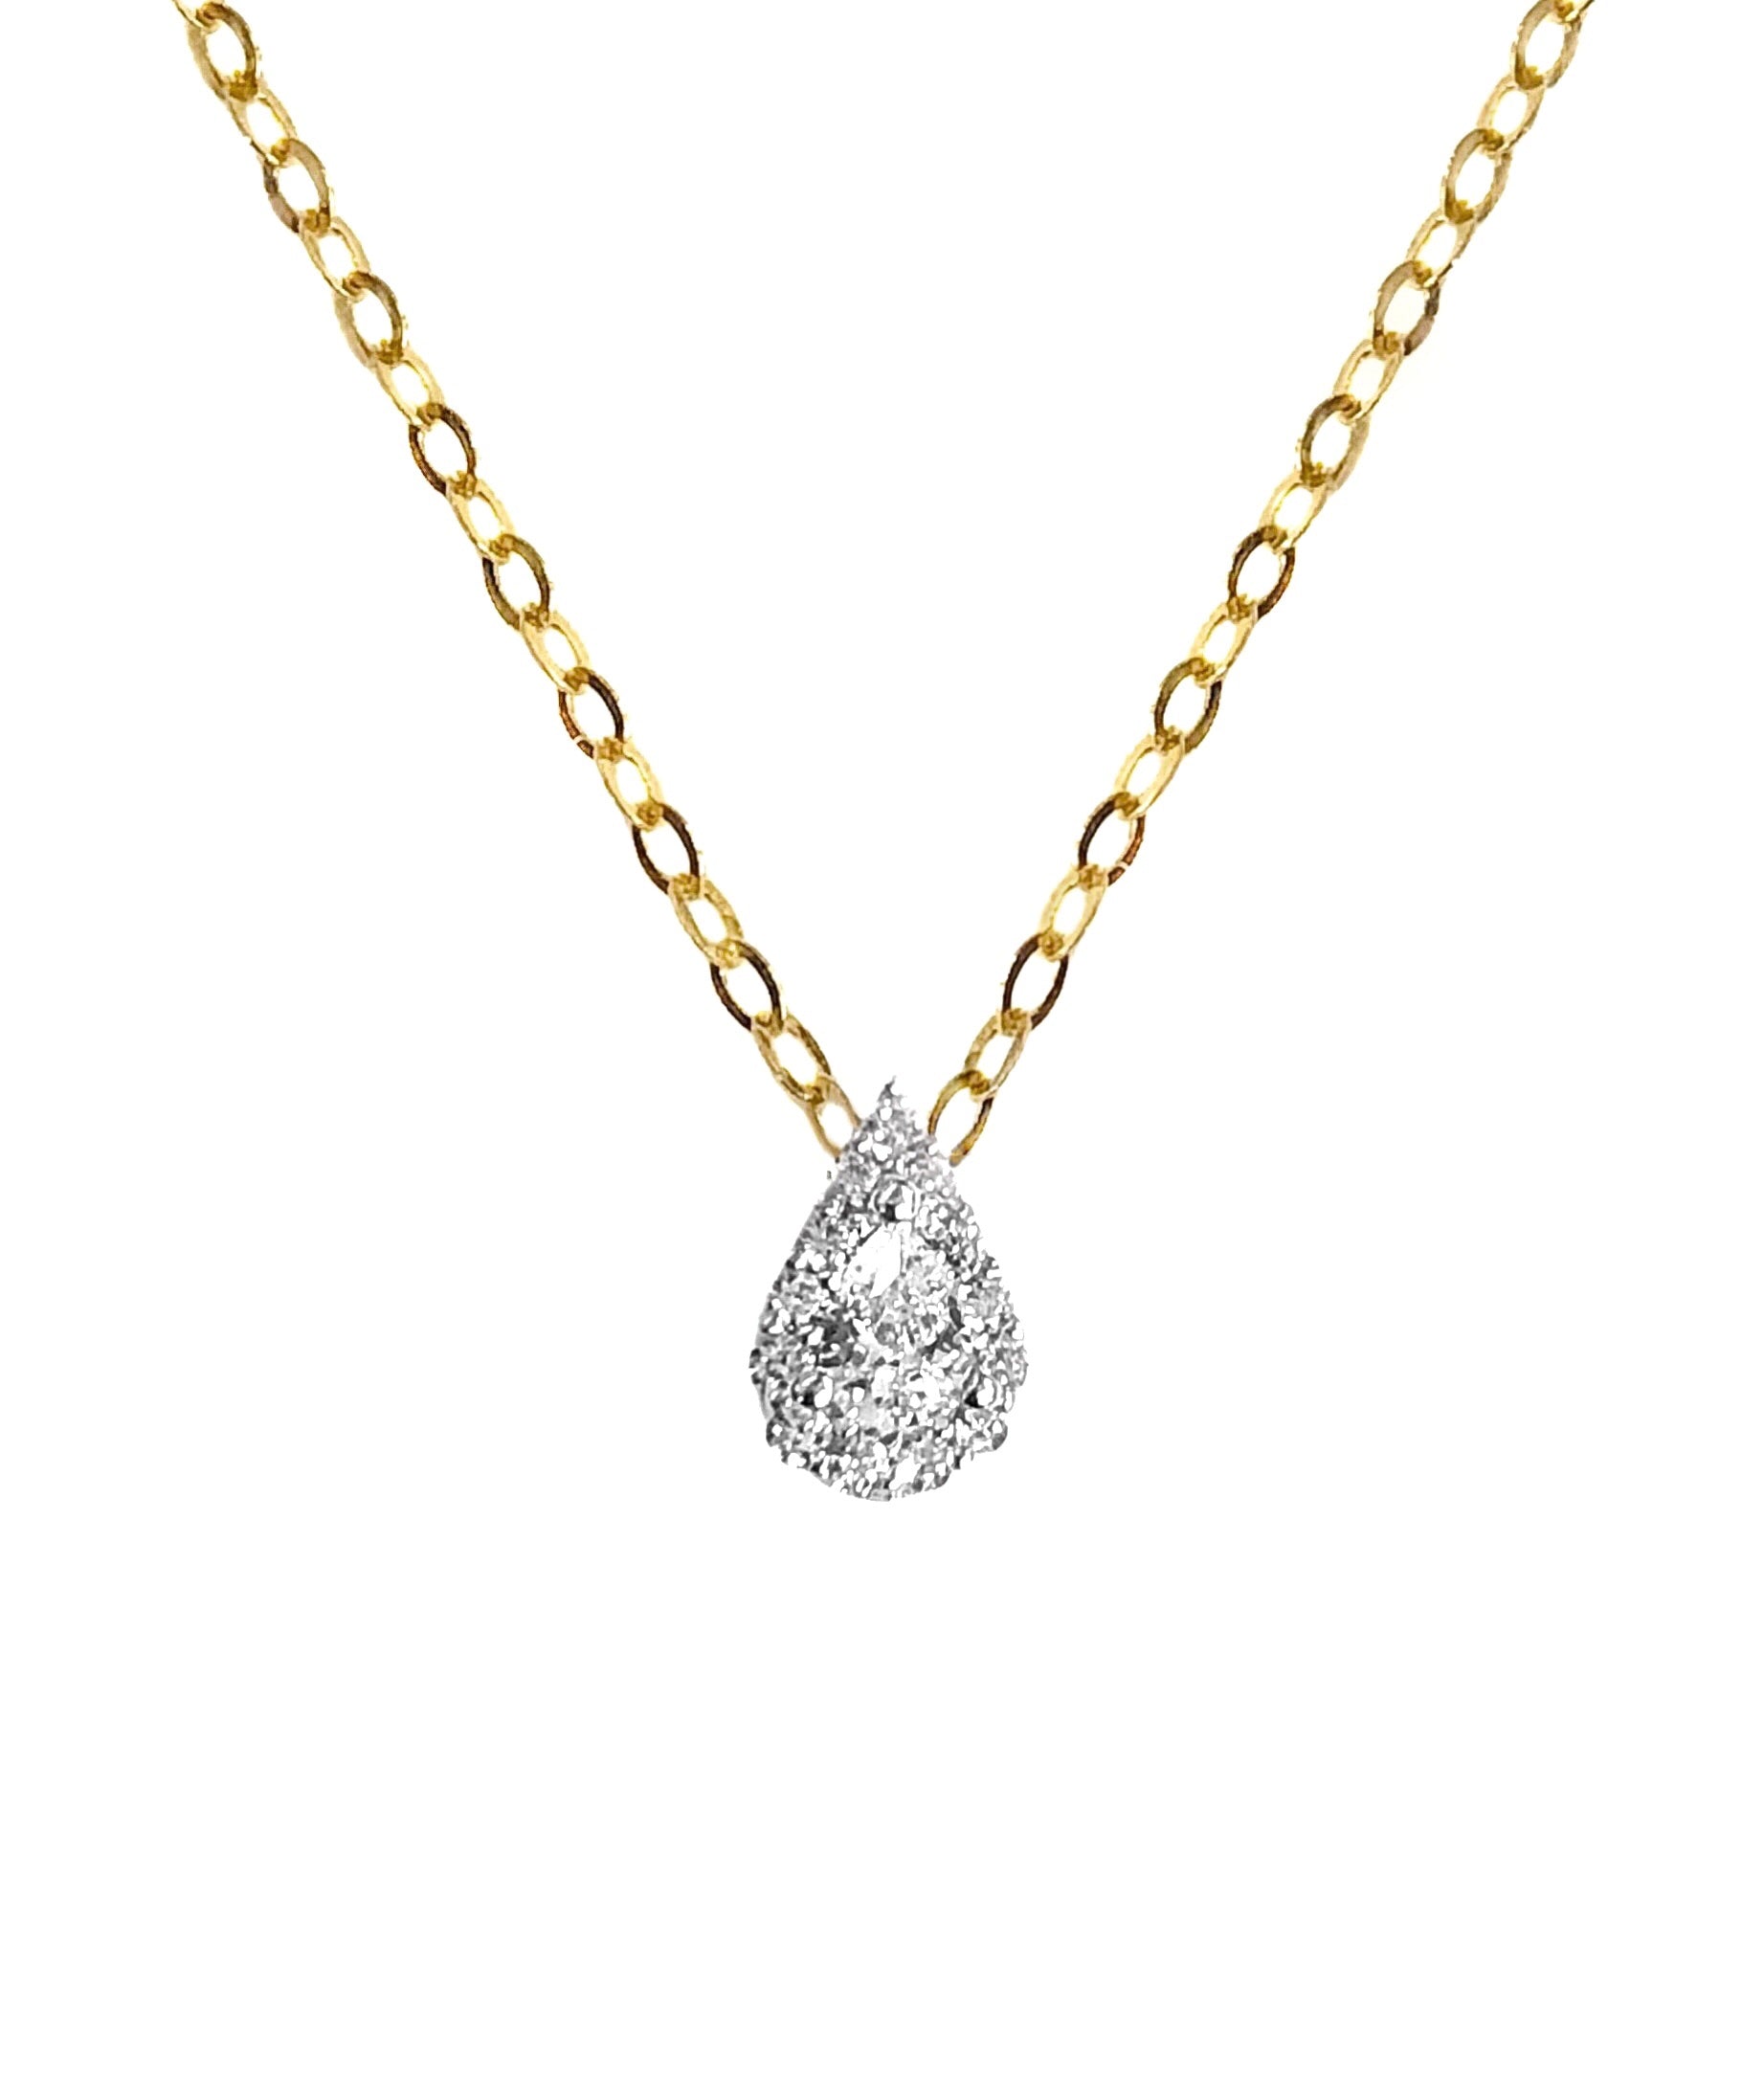 14K YELLOW GOLD PAVE PEAR DROP NECKLACE